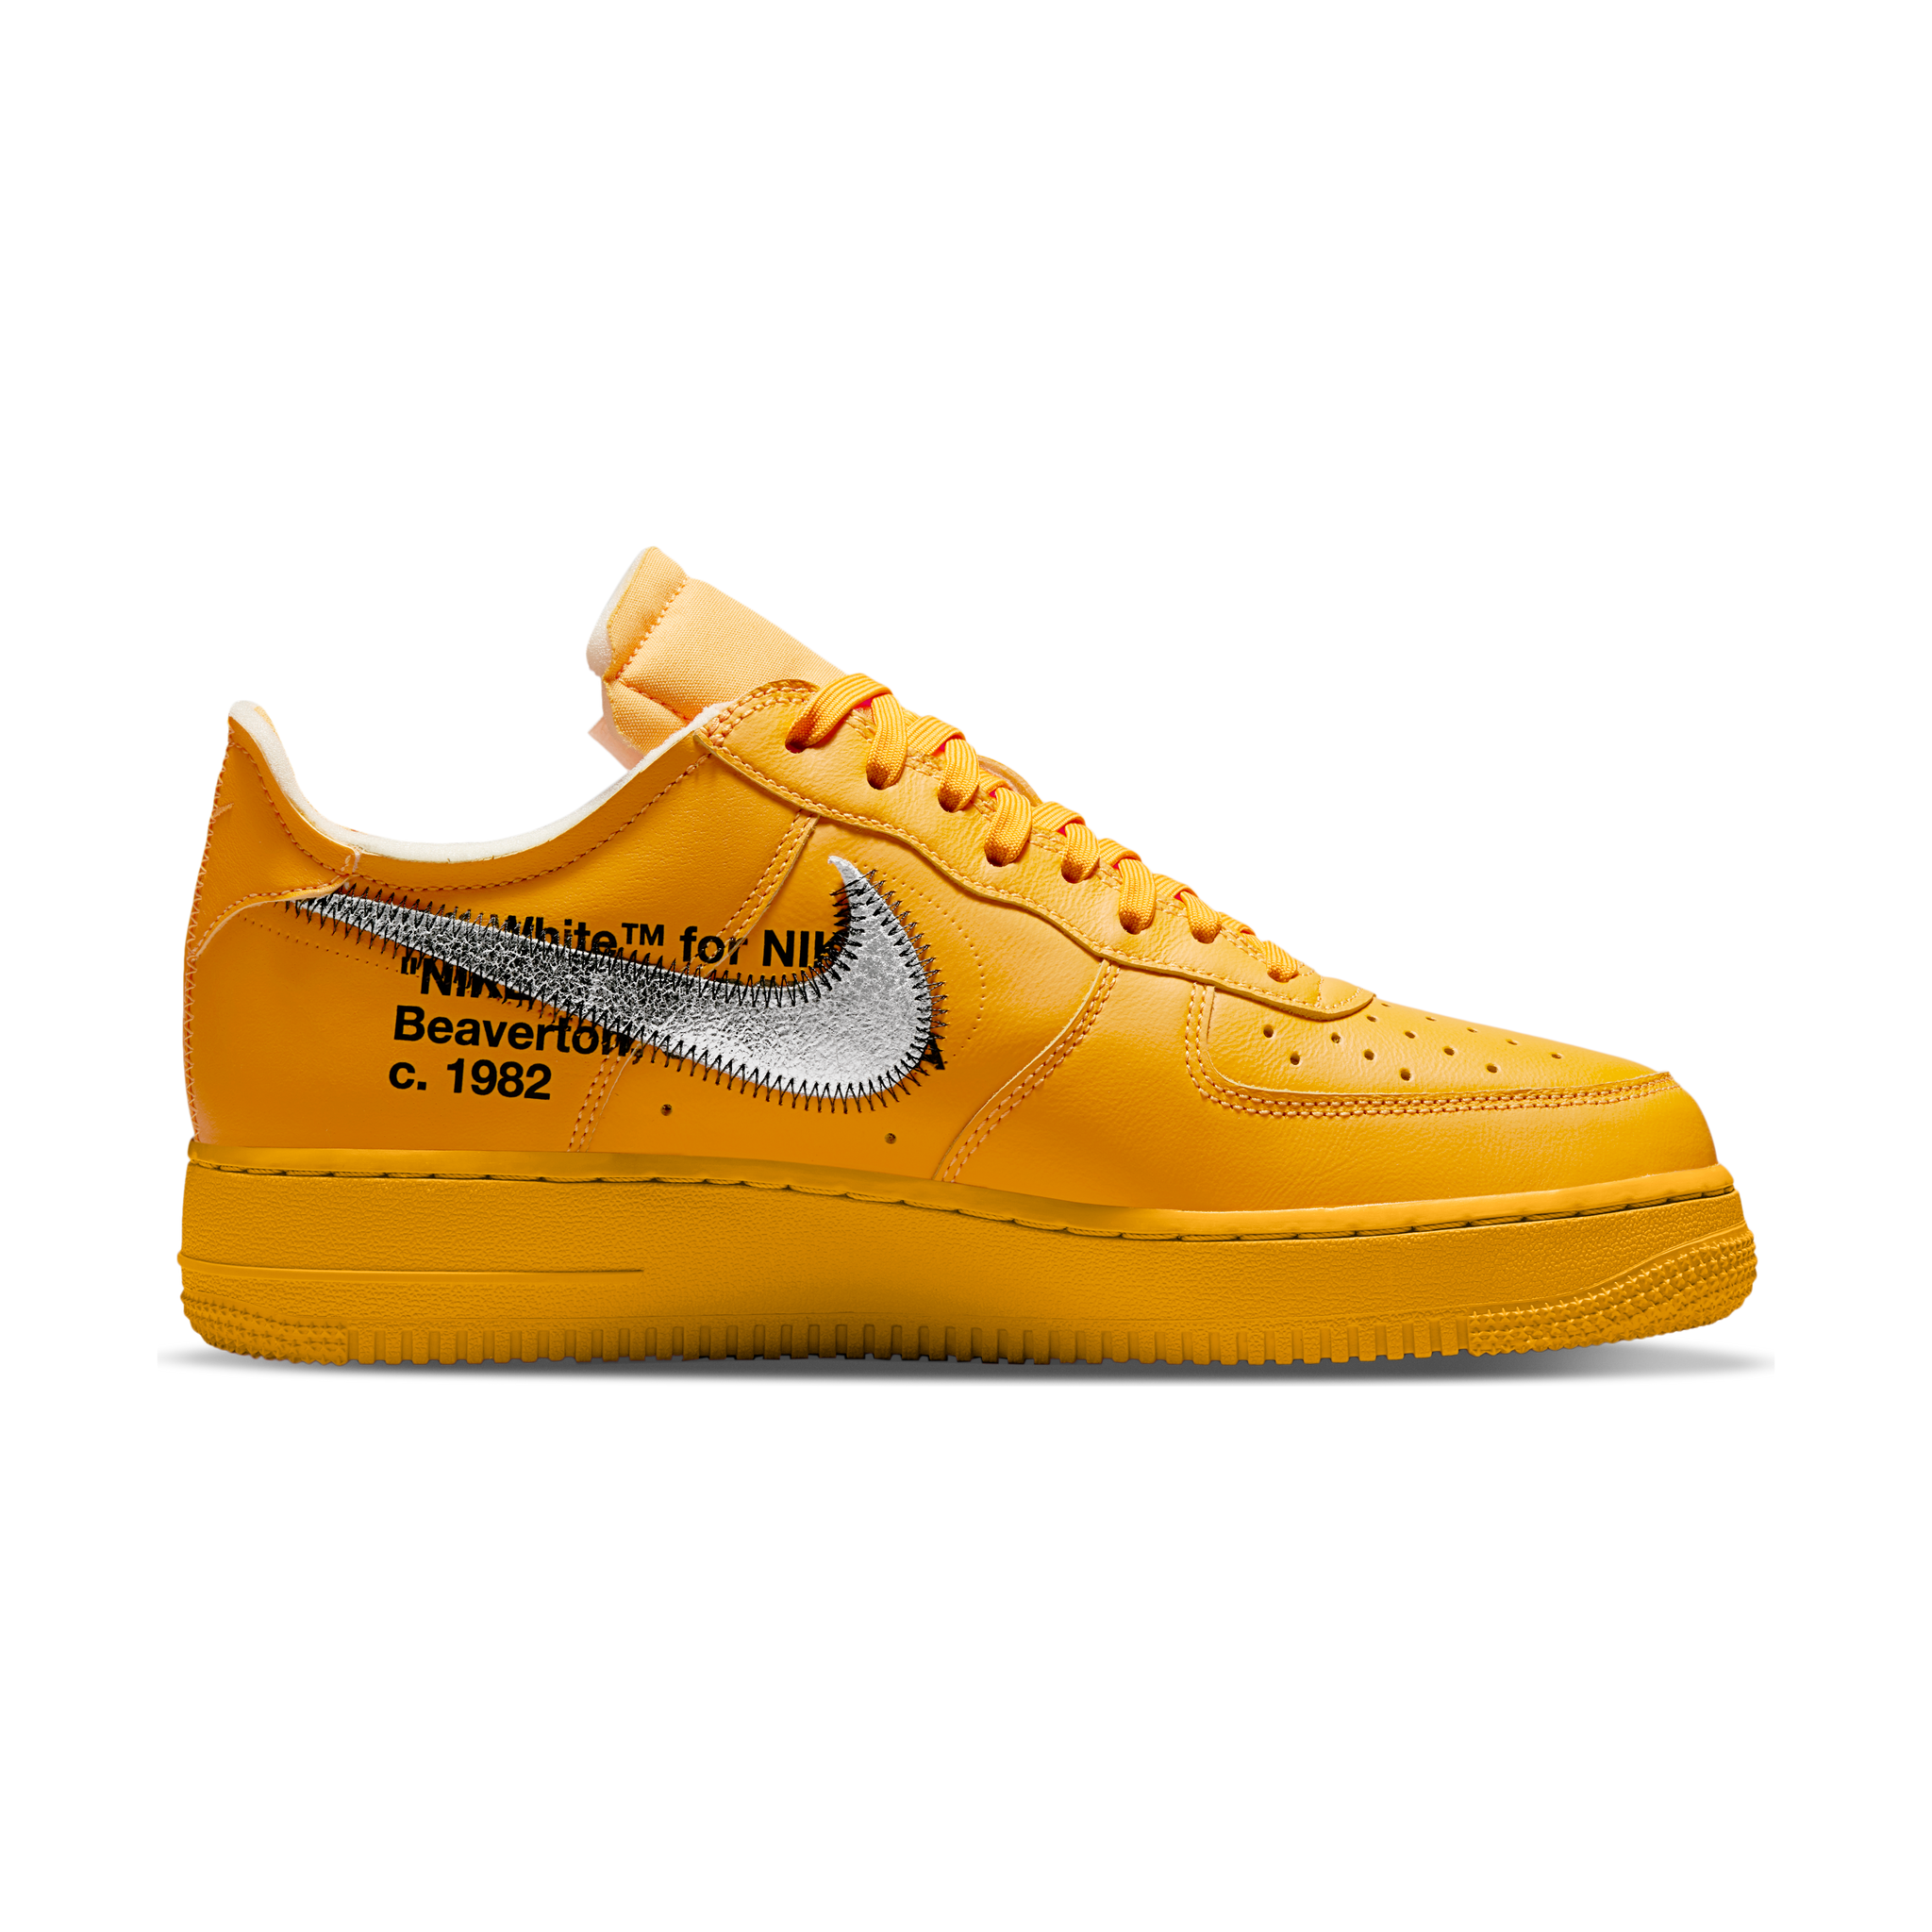 GmarShops Marketplace, Air Force 1 x Off White Yellow